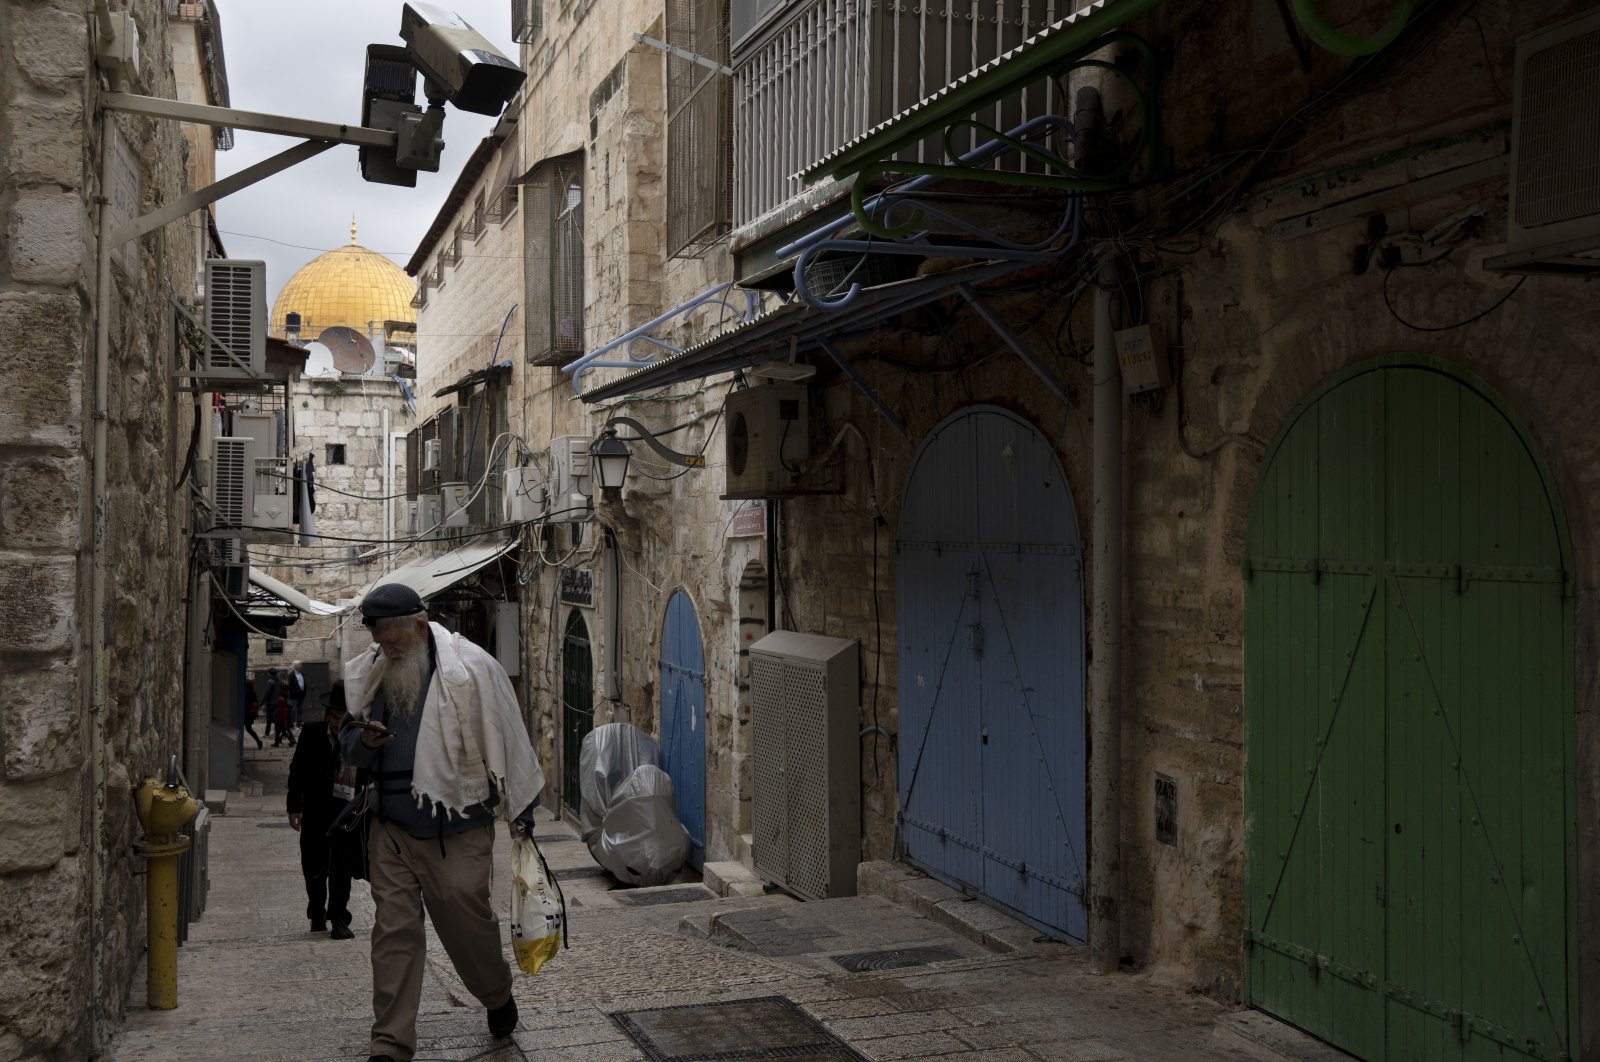 A Jewish man passes a row of Palestinian shops closed in the Old City of Jerusalem as part of a general strike, a day after 10 Palestinians were killed in an Israeli army raid in the West Bank, occupied Palestine, Feb. 23, 2023. (AP Photo)